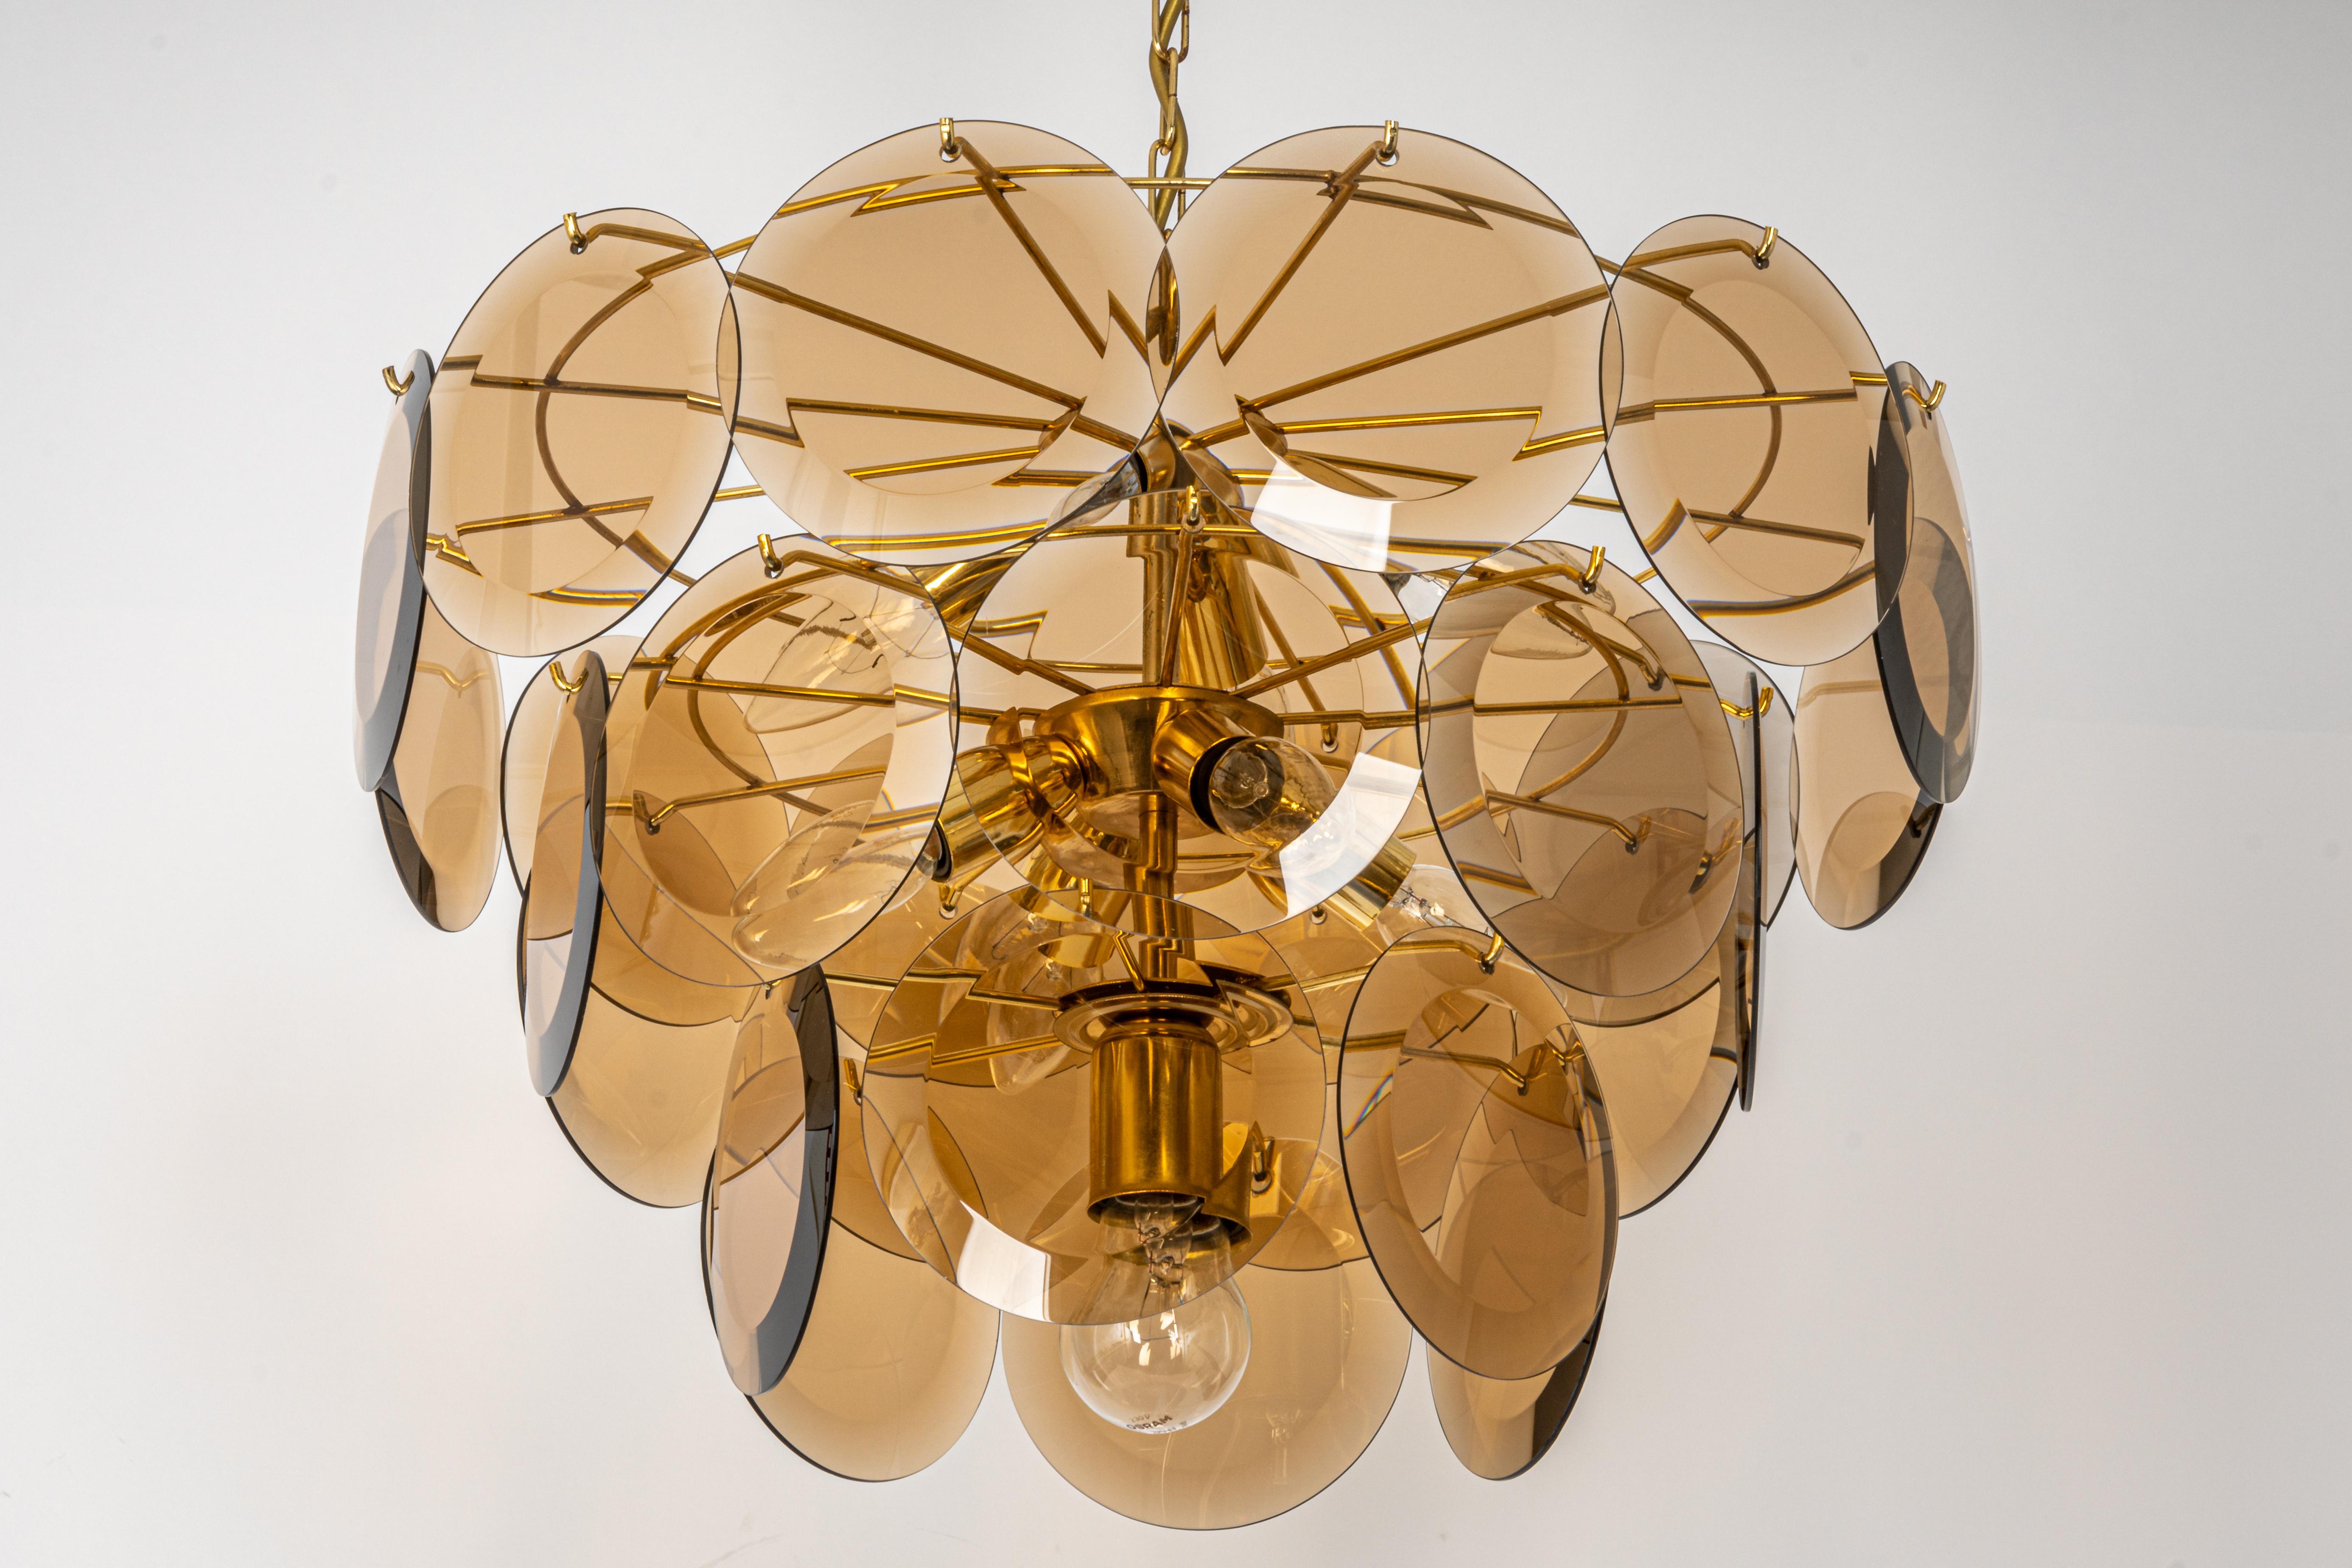 A stunning four-tier chandelier by Vistosi, Italy, manufactured in, circa 1960-1969
High quality and in very good condition. Cleaned, well-wired and ready to use. 
The fixture requires 7 x E14 standard bulbs with 40W max each 
Light bulbs are not